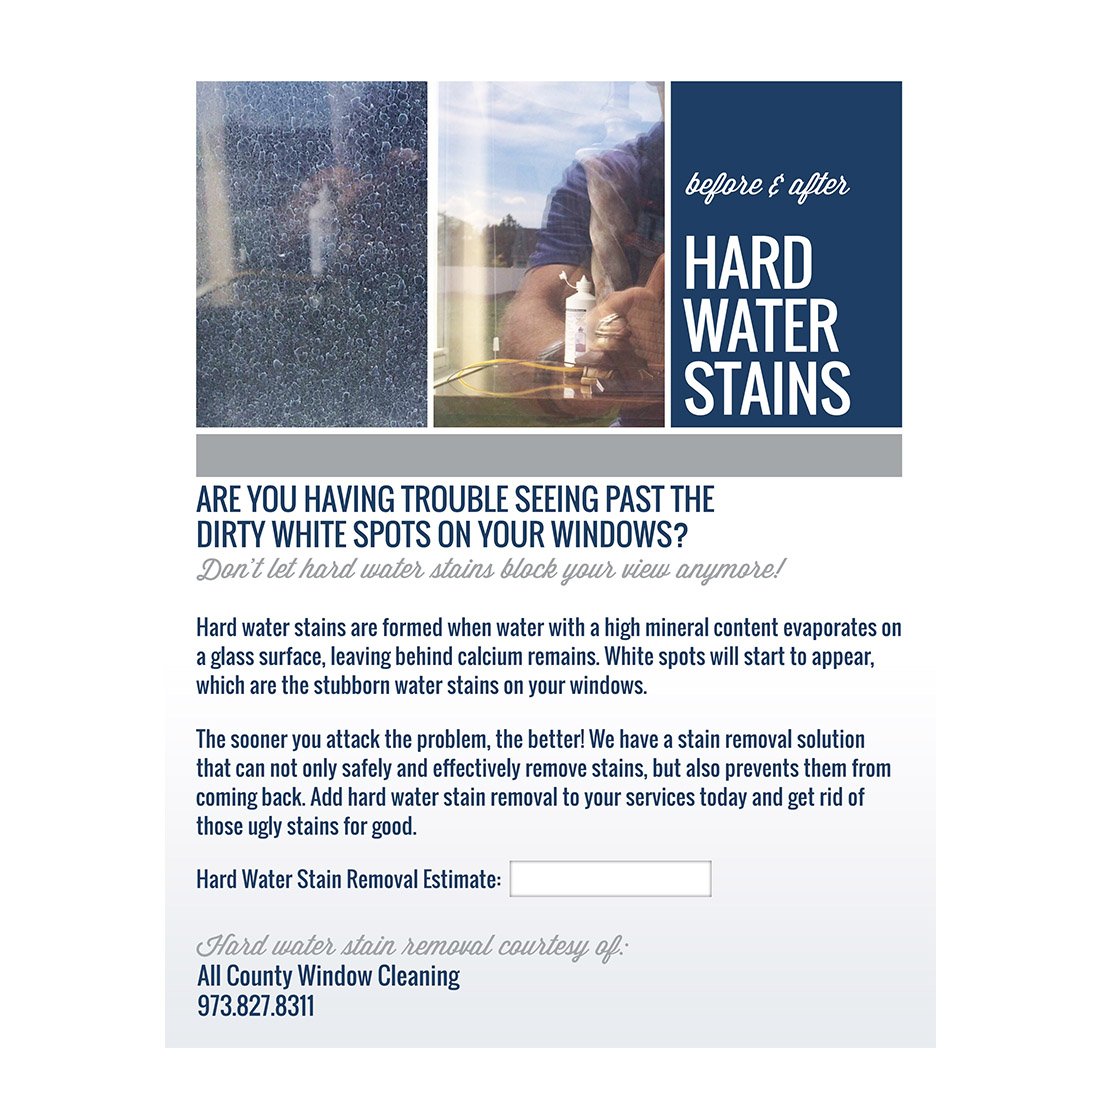 Hard Water Before and After - Handout Packet - Back View